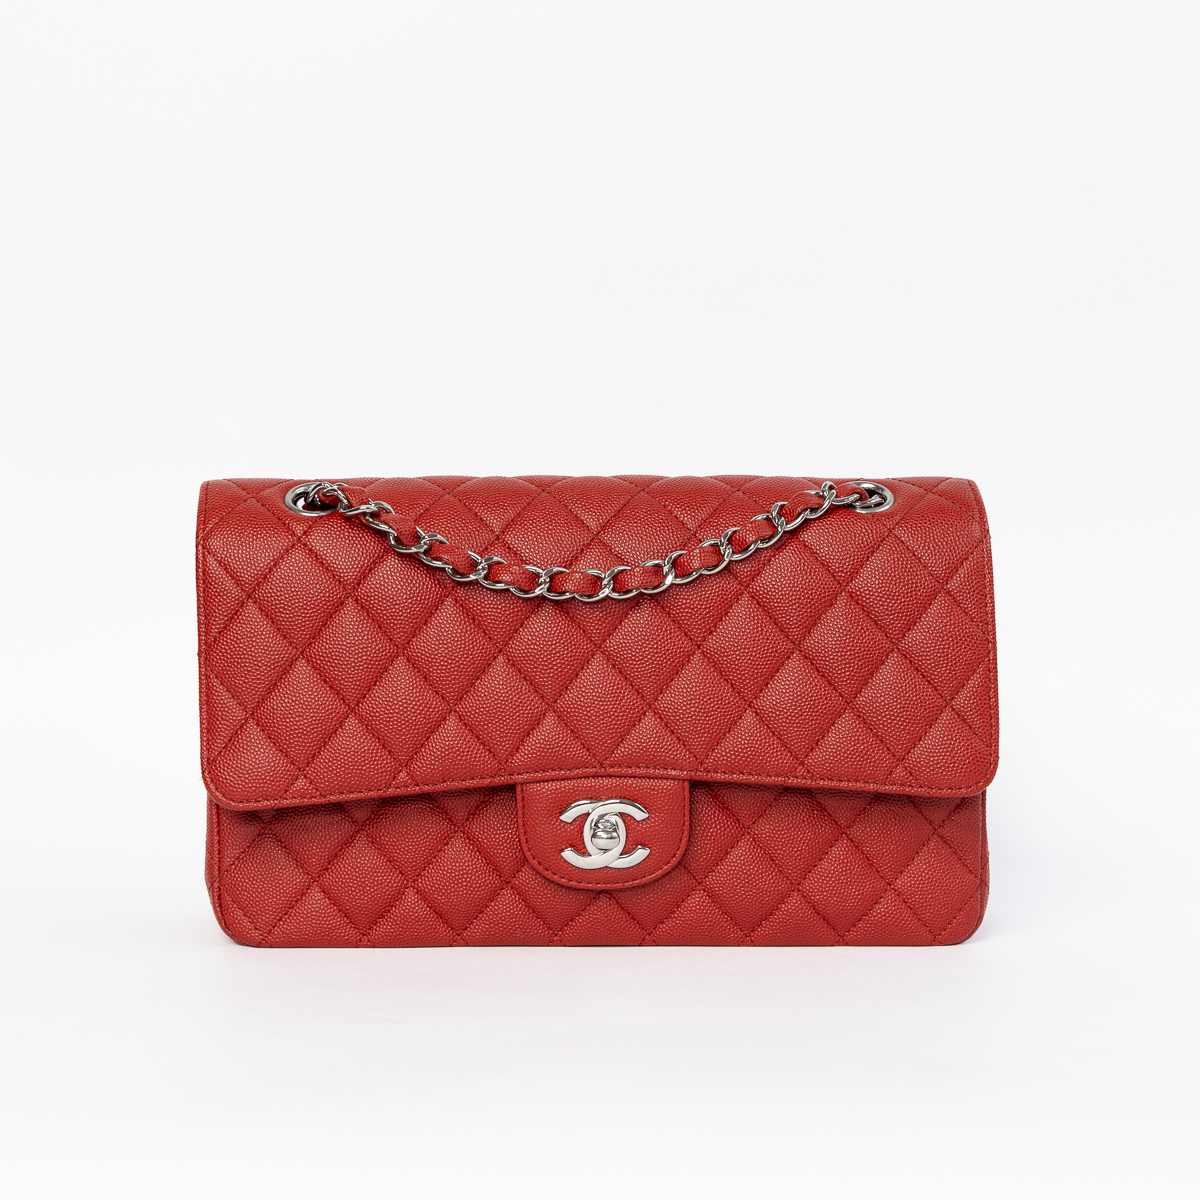 Chanel Timeless Medium Bag Caviar Red with silver hardware